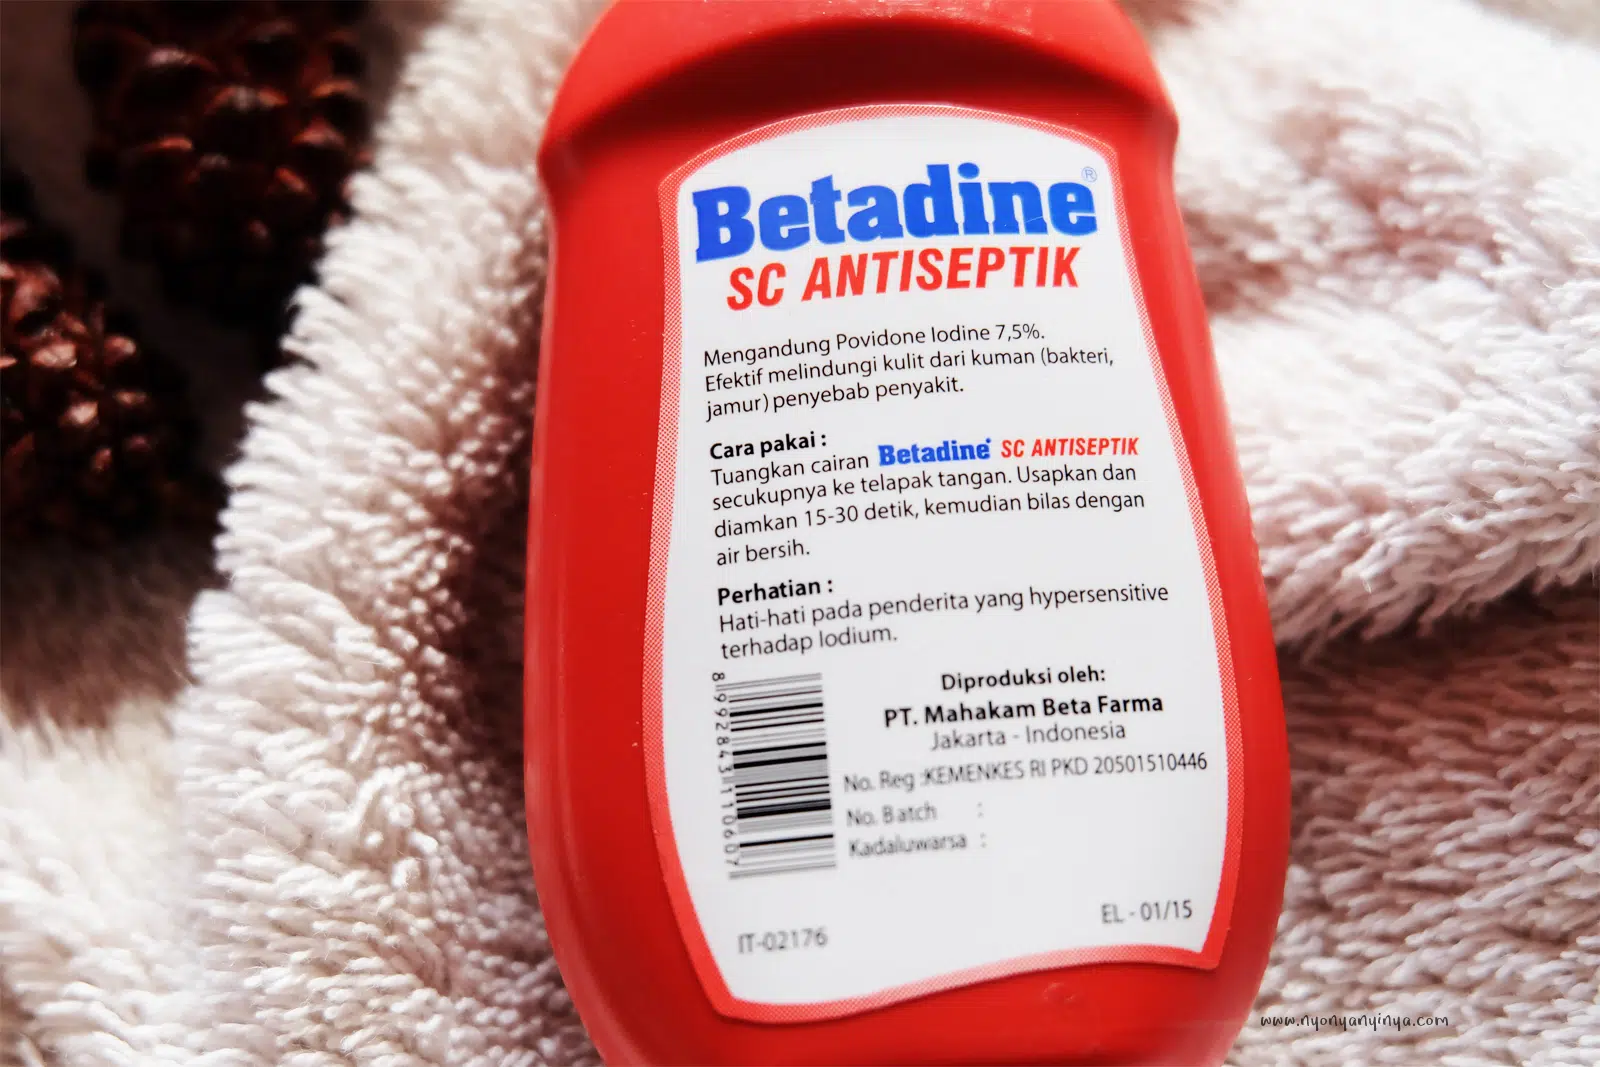 antiseptic cleaners that contain Povidone-iodine are highly effective at removing hfmd viruses